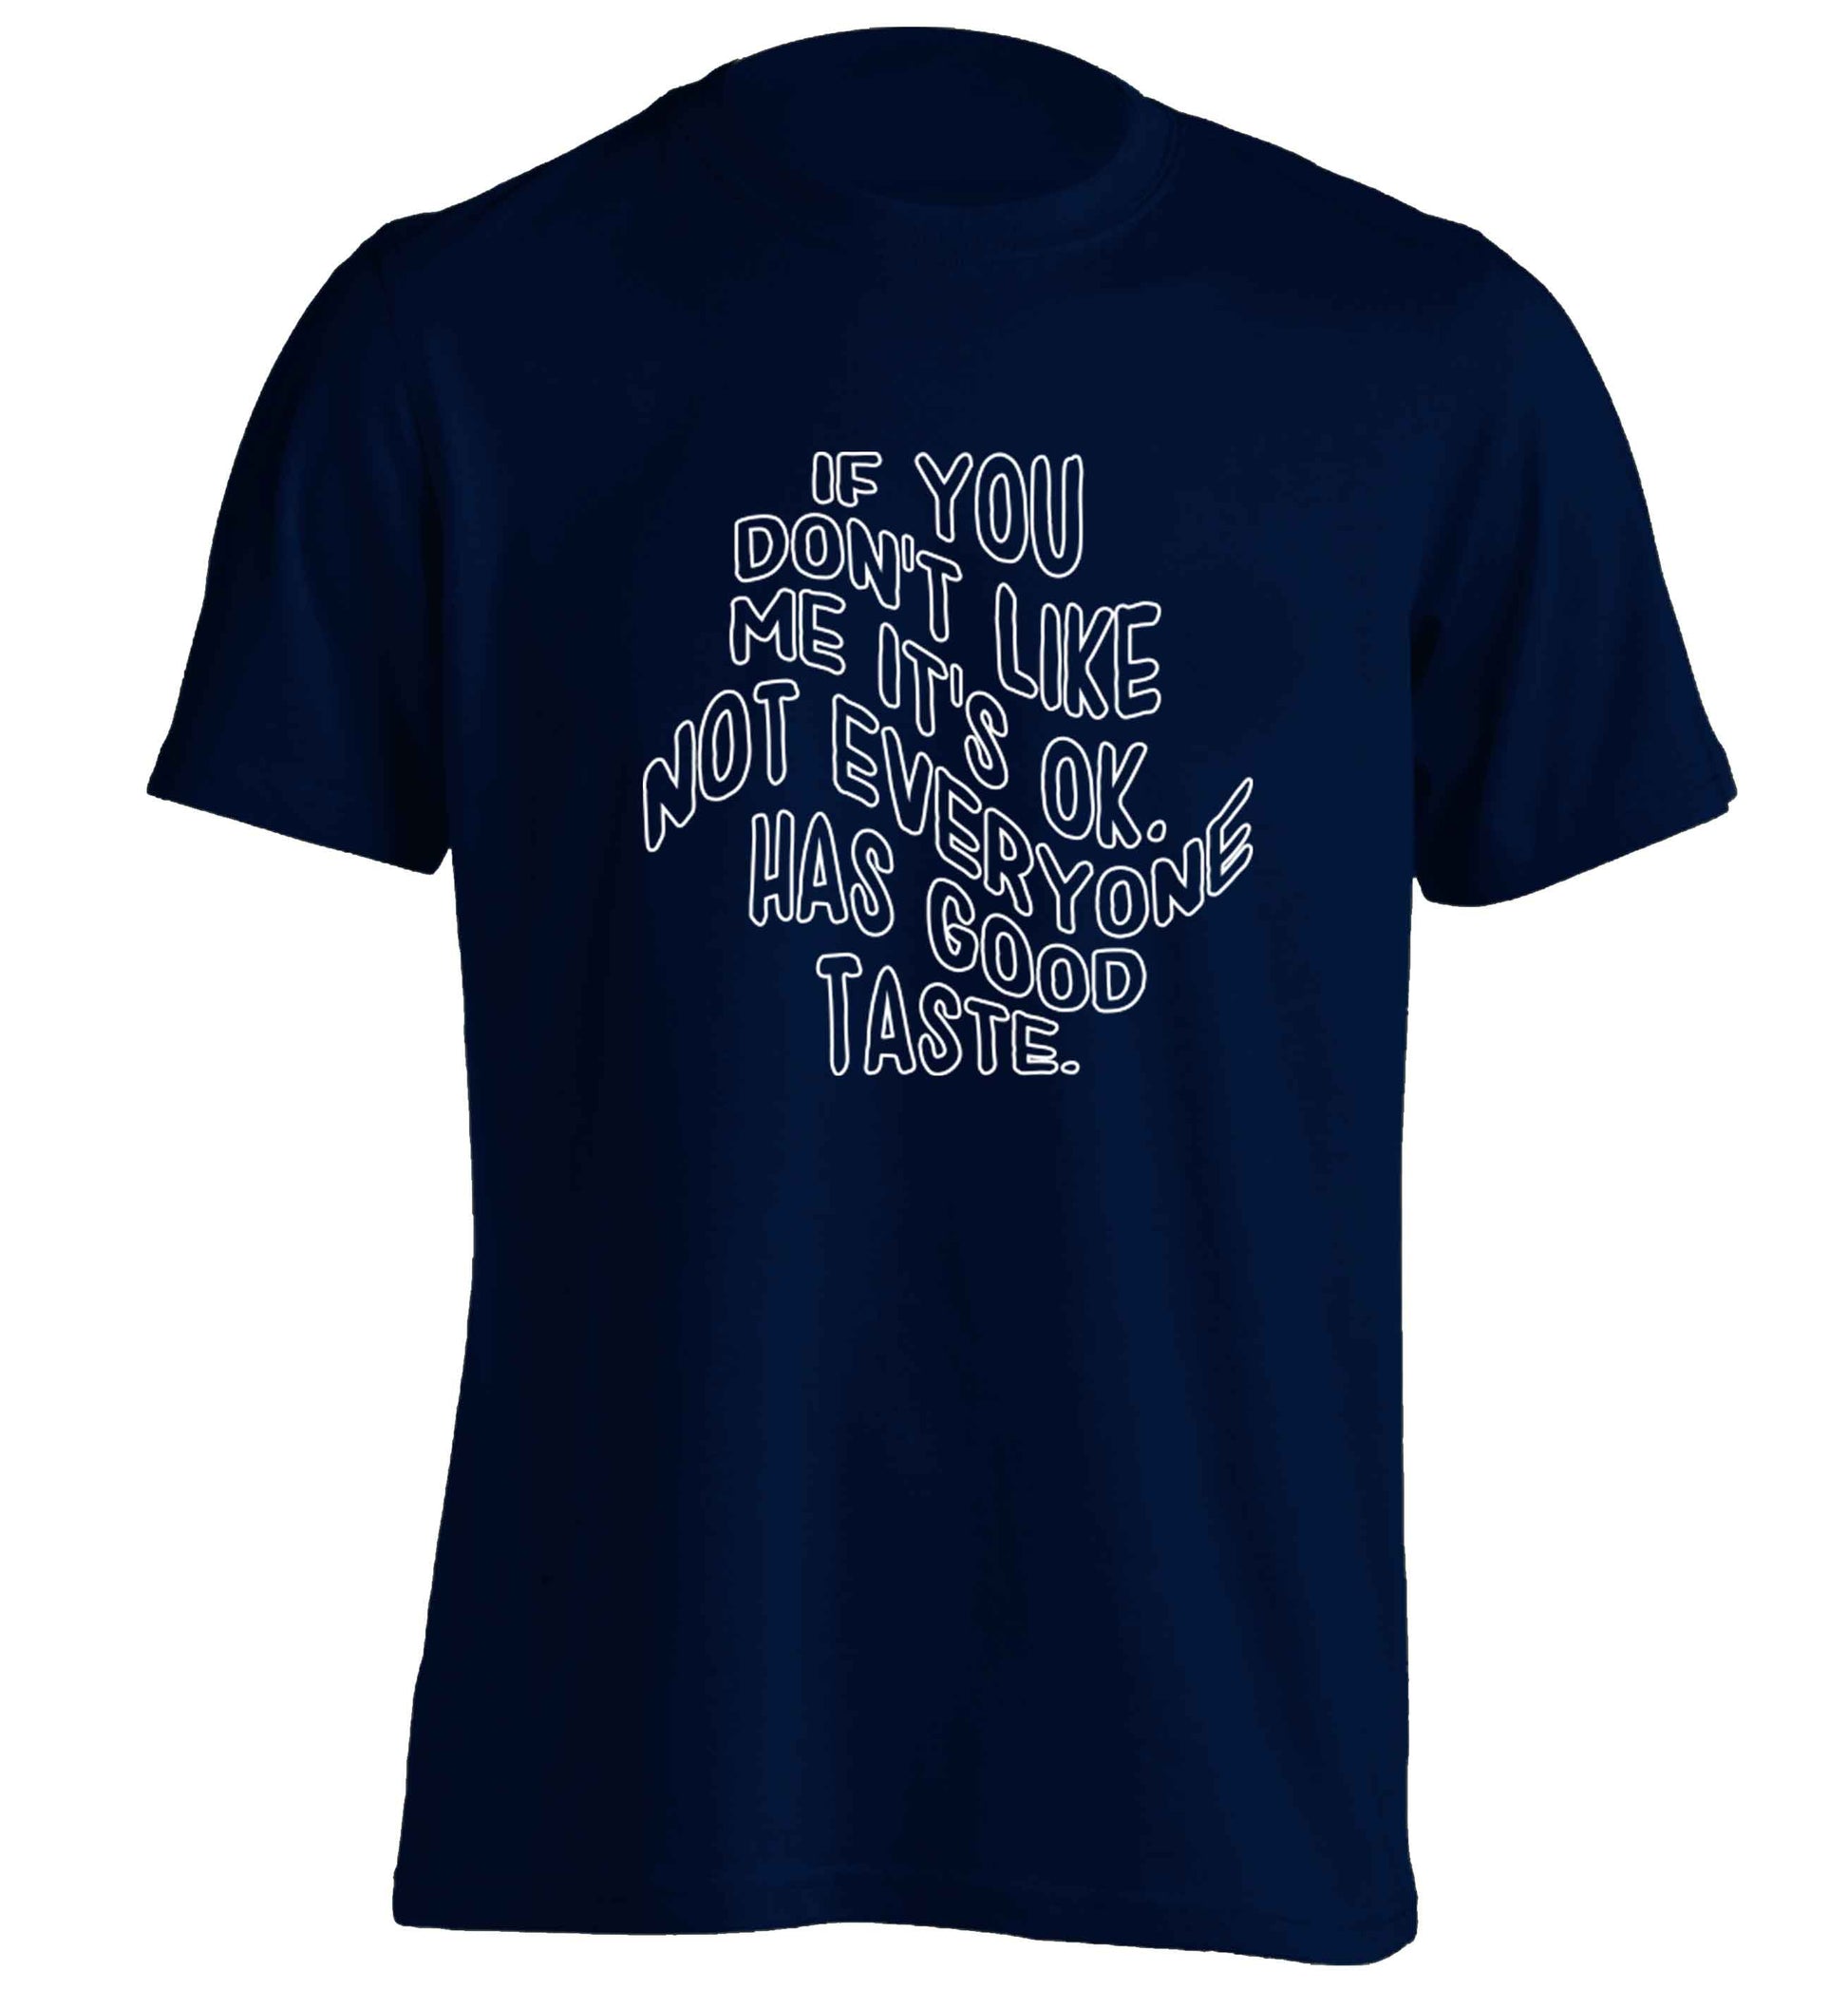 If you don't like me it's ok not everyone has good taste adults unisex navy Tshirt 2XL